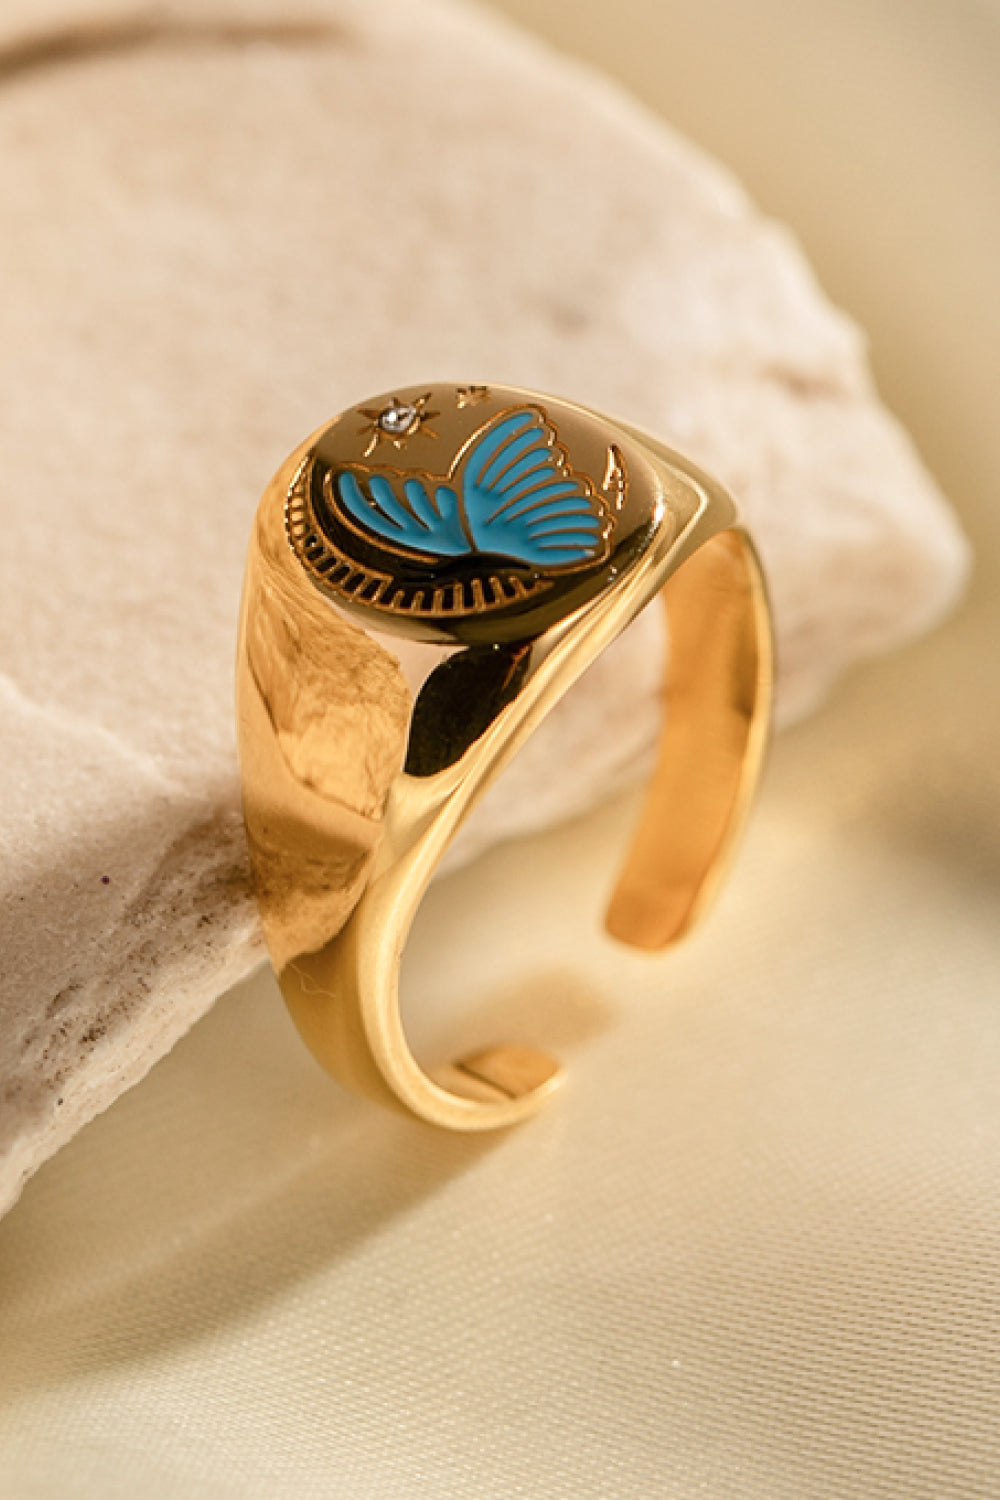 Elevate your style with our Stainless Steel Butterfly Open Ring. This durable and stylish stainless steel ring features an elegant butterfly design, perfect for adding a touch of charm to your jewelry collection.